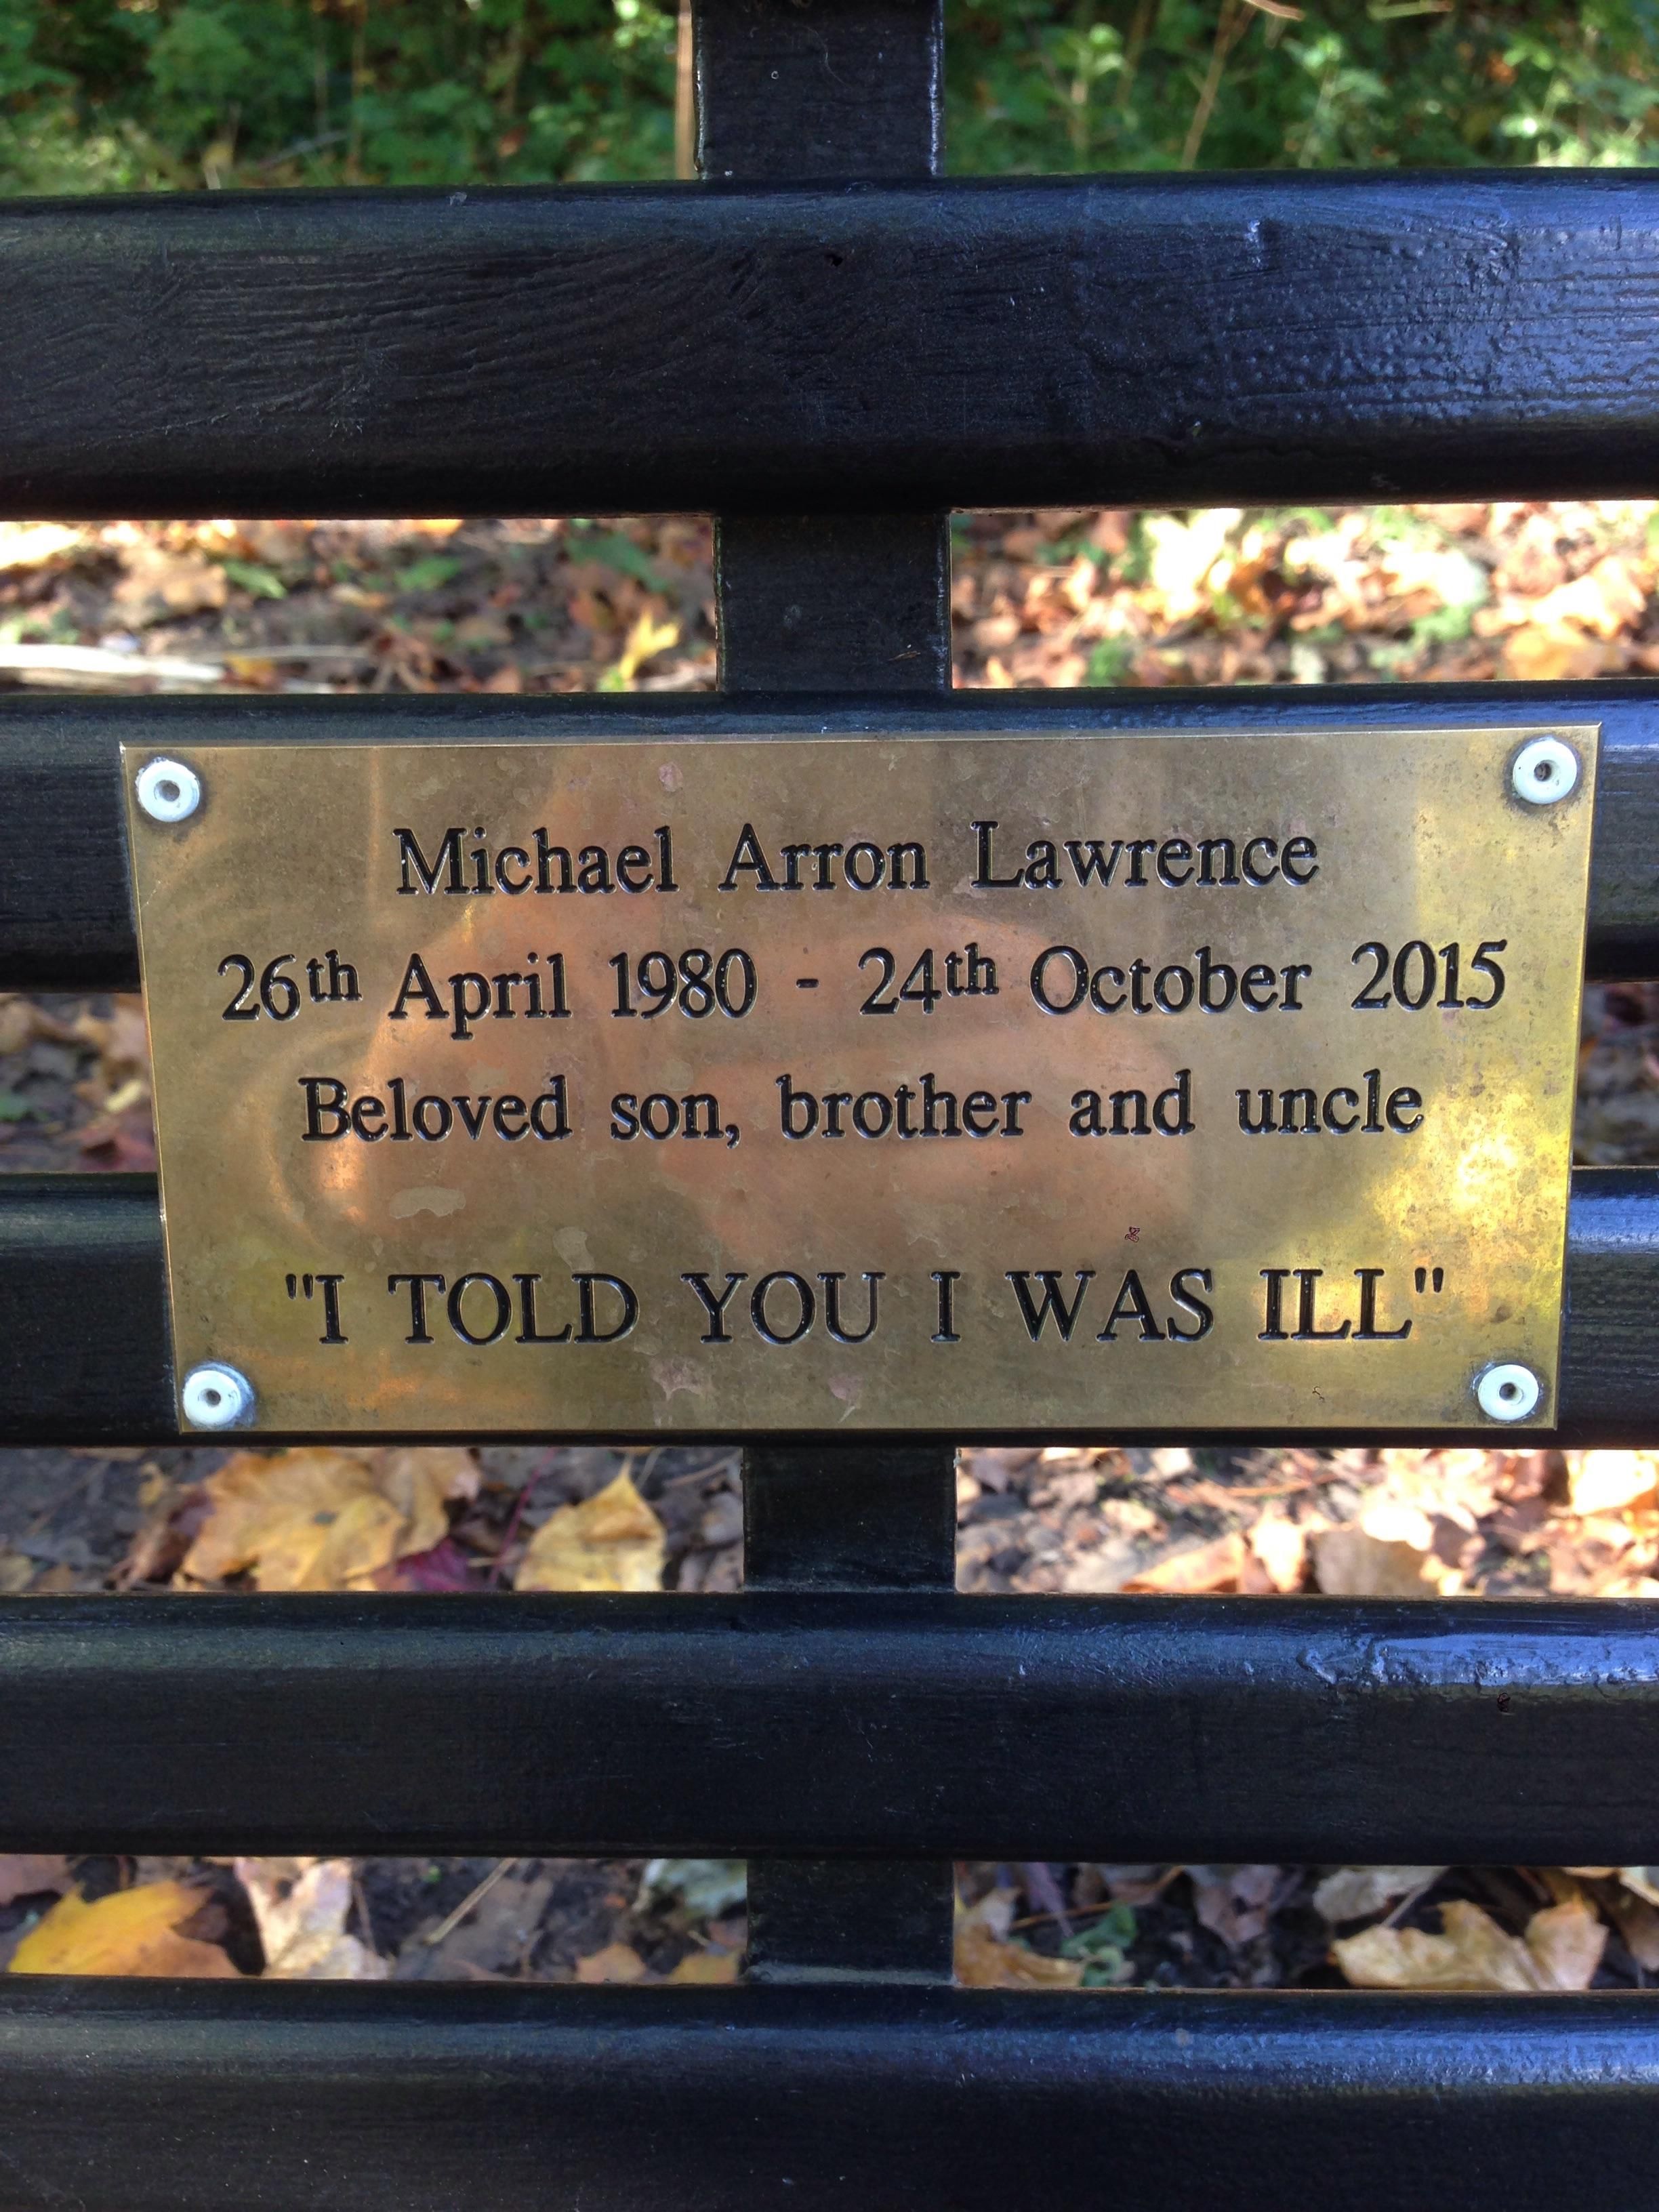 This bench memorial quote